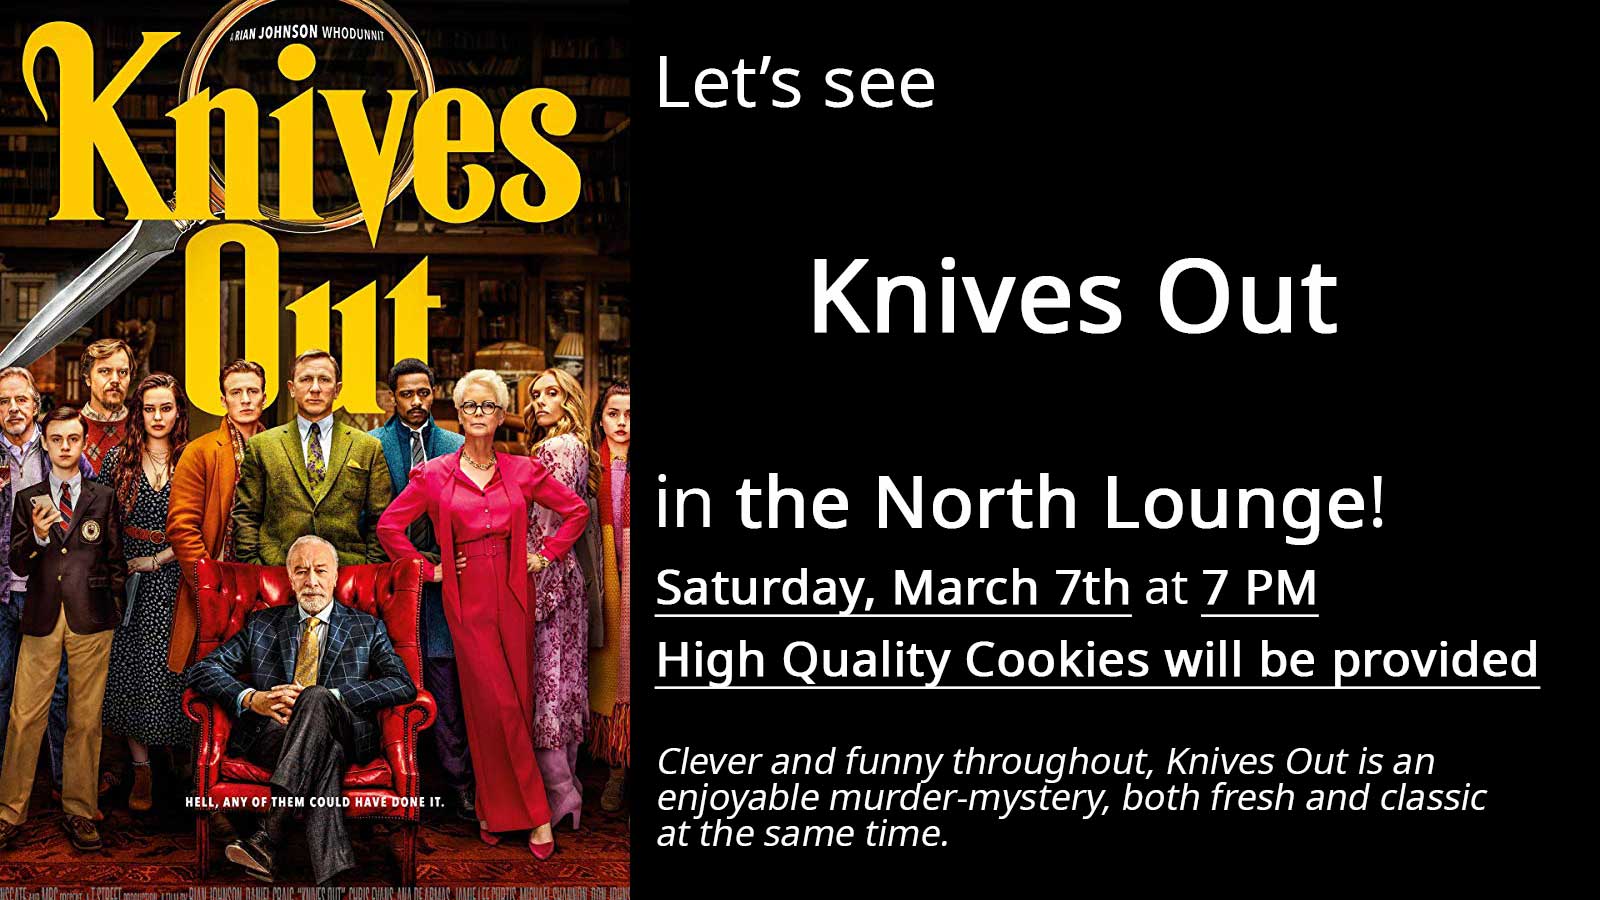 Knives night out movie poster